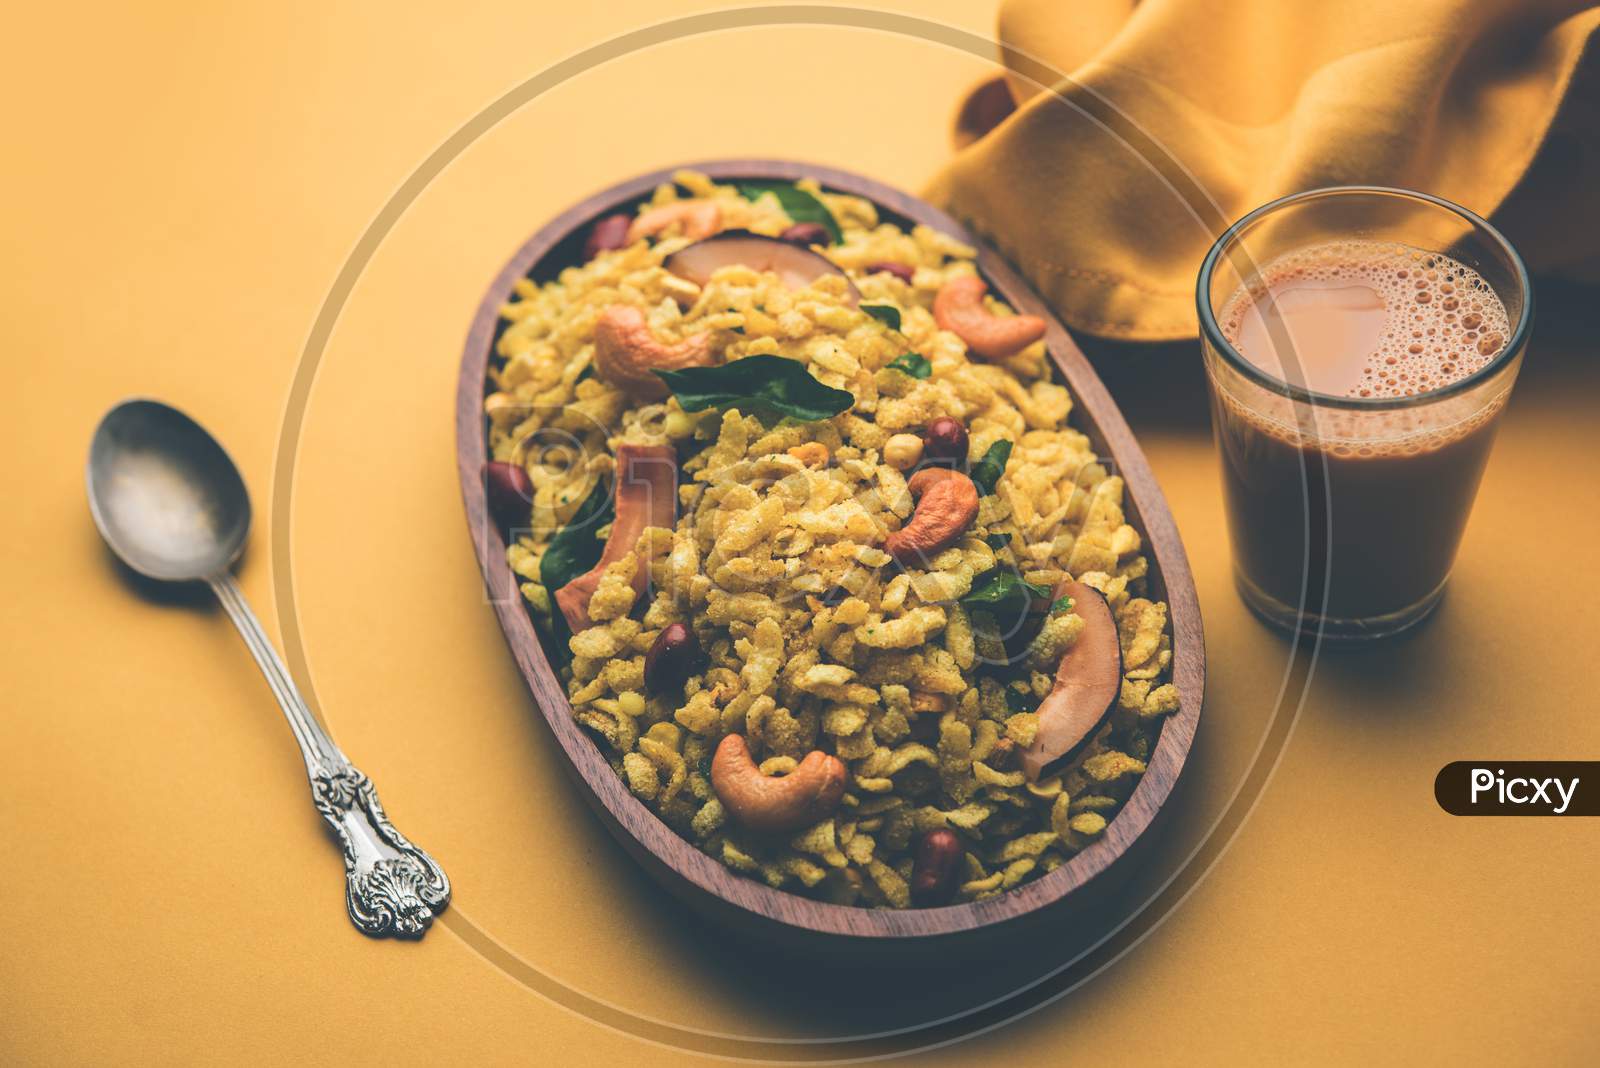 Jada Poha Namkeen Chivda / Thick Beater Rice Chiwda is a jar snack with a mix of sweet, salty and nuts flavours, served with tea